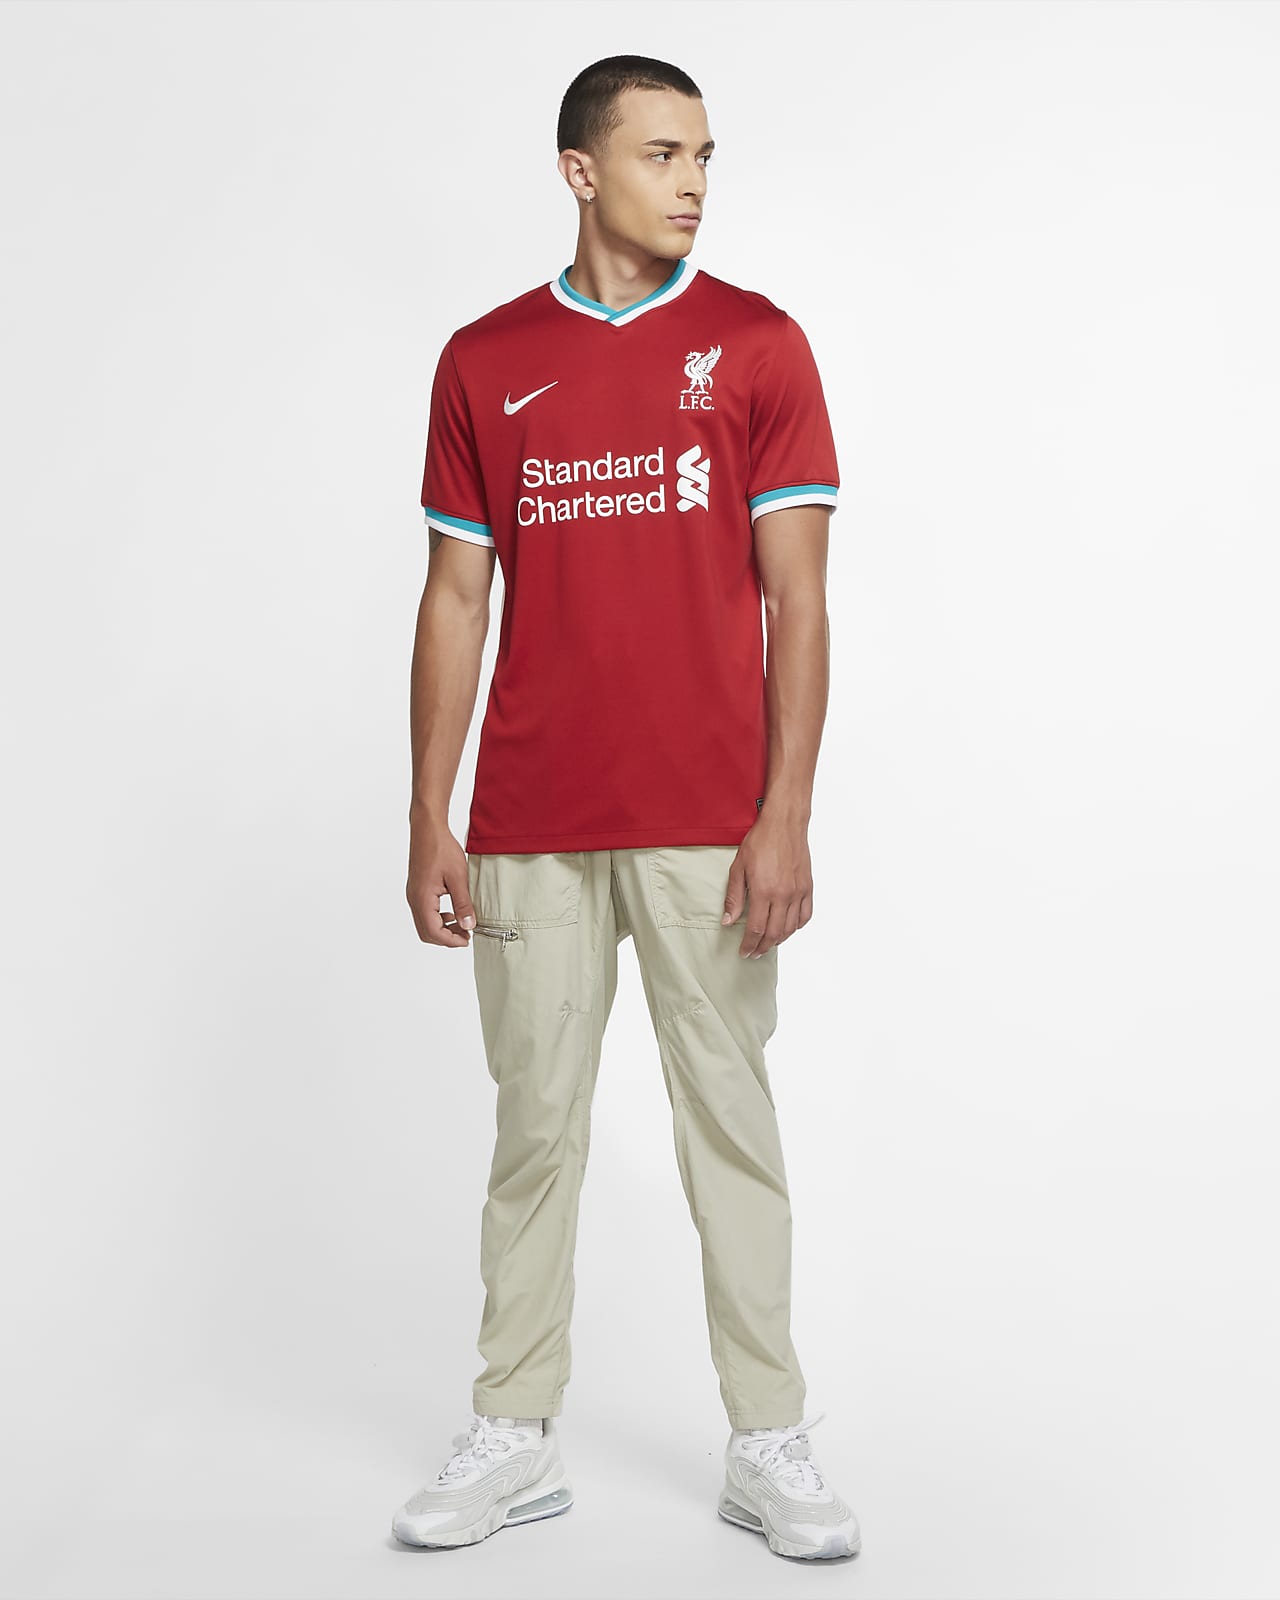 liverpool fc jersey india